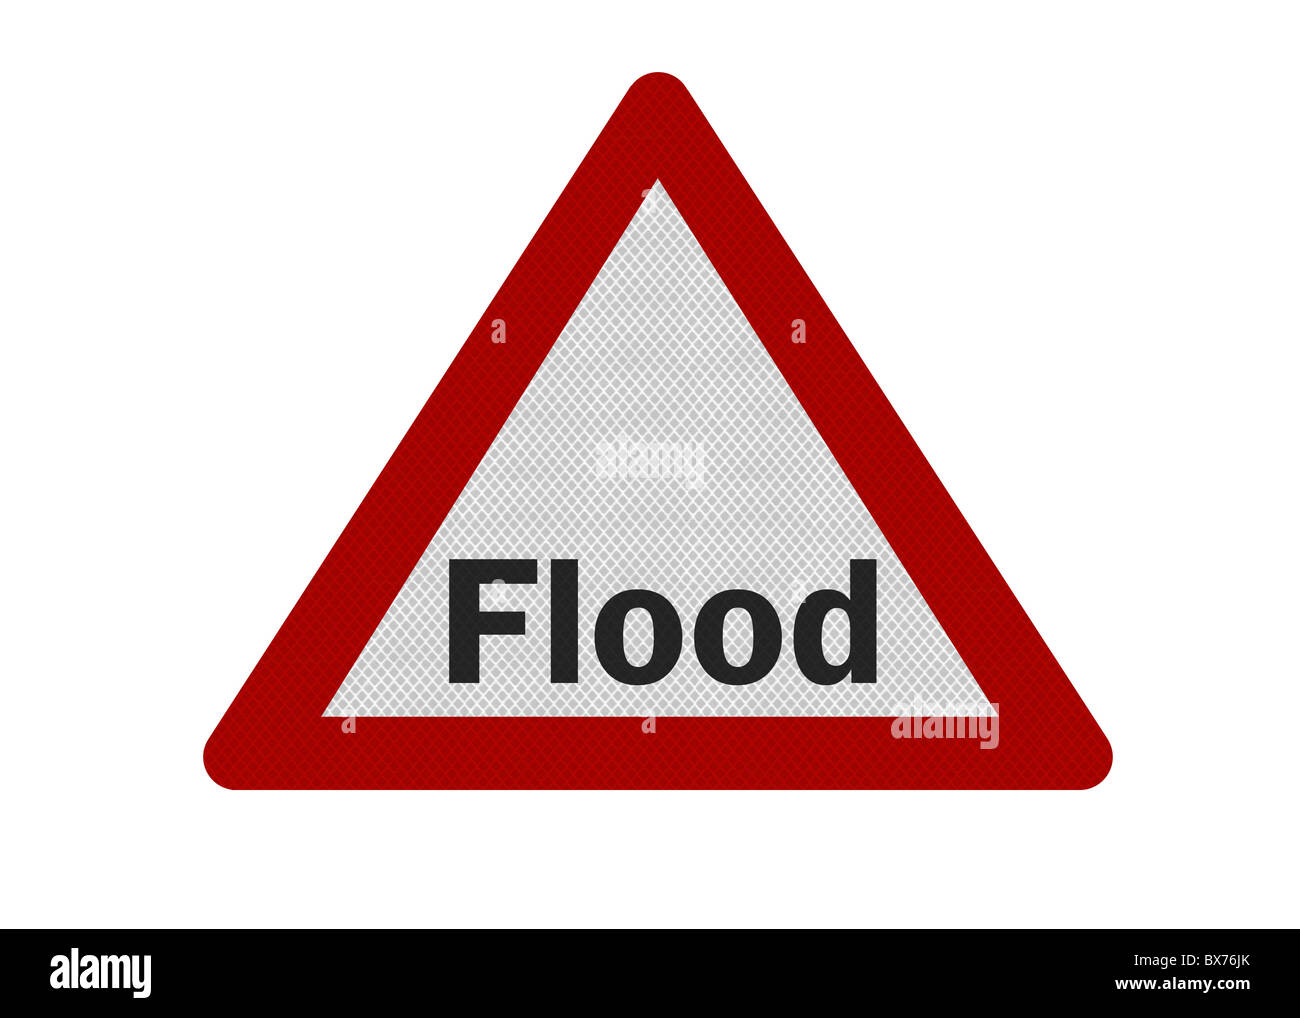 Photo realistic reflective metallic 'flood warning' sign, isolated on a pure white background. Stock Photo